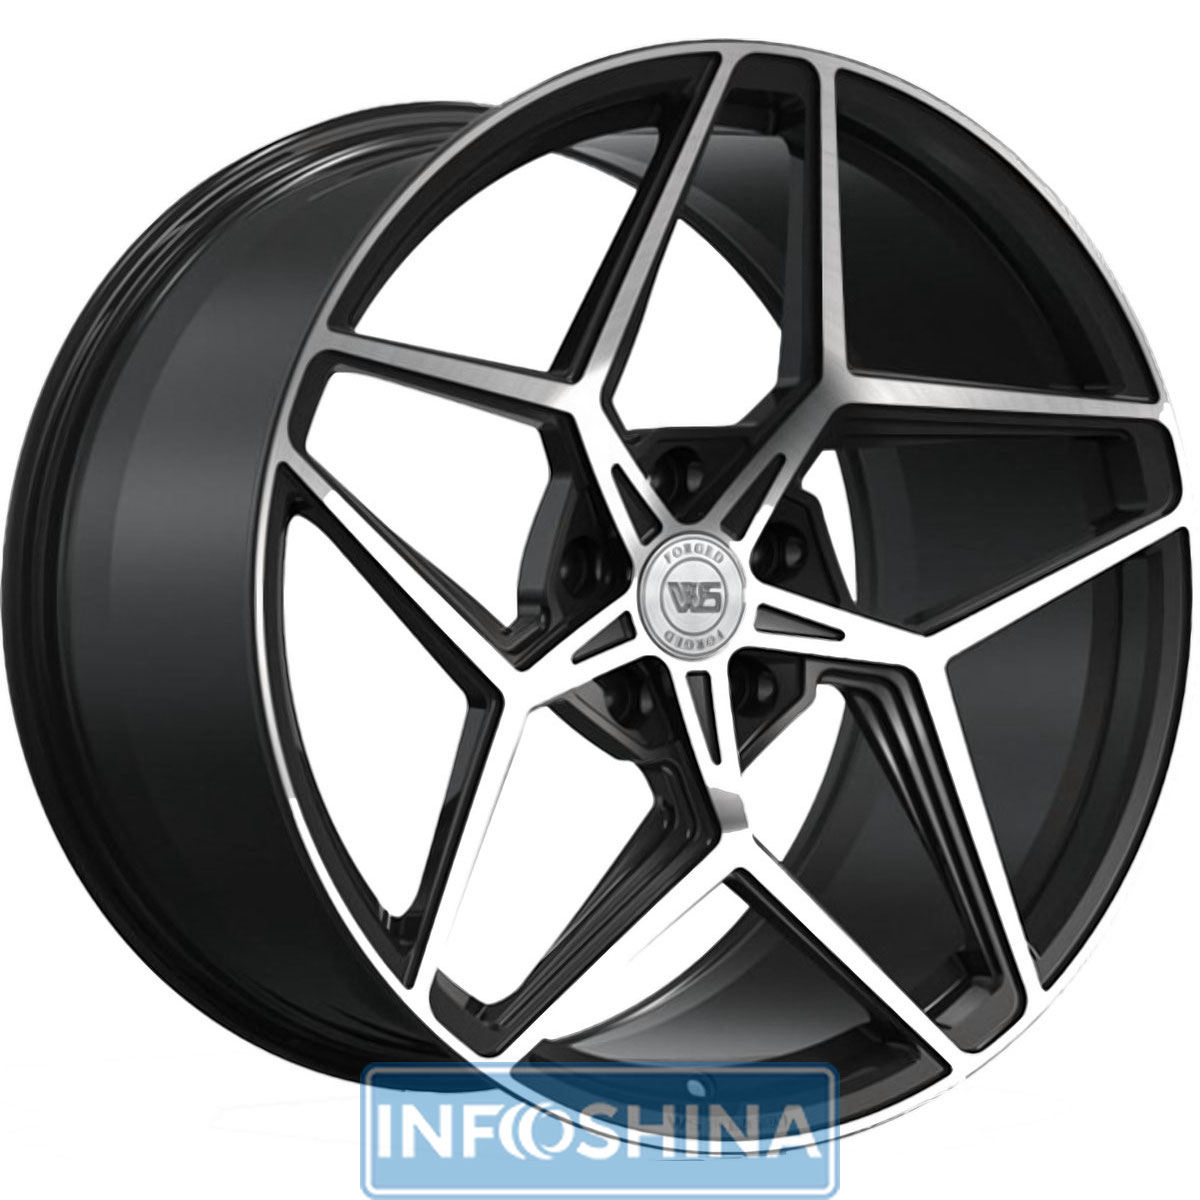 Купить диски WS Forged WS2125 Satin Black With Machined Face R20 W10 PCD5x120 ET20 DIA66.9